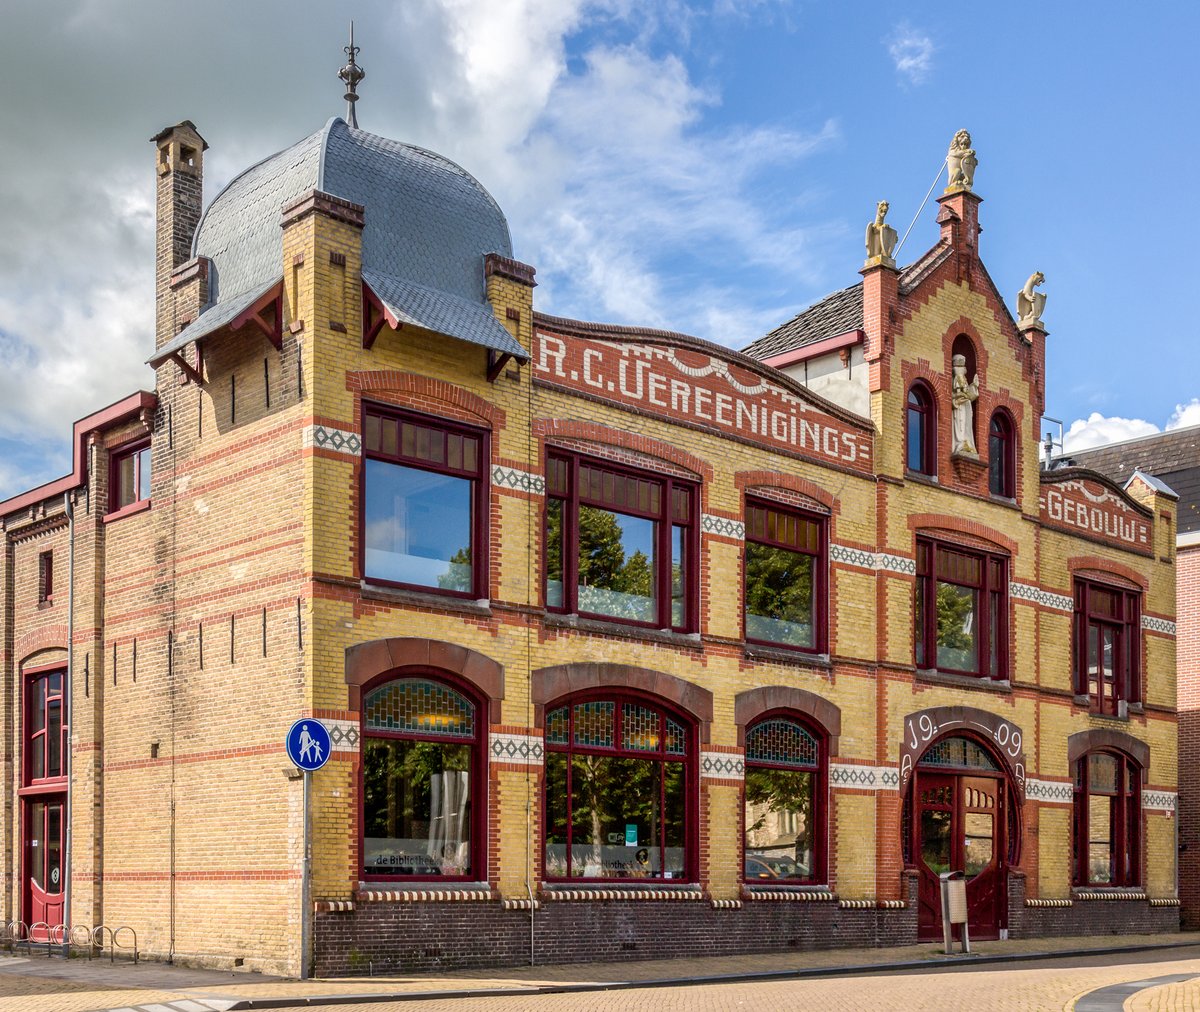 The former Roman Catholic Association Building in #Franeker (Friesland) was designed in 1909 by architect Nicolaas J. Adema) in the Art Nouveau style.